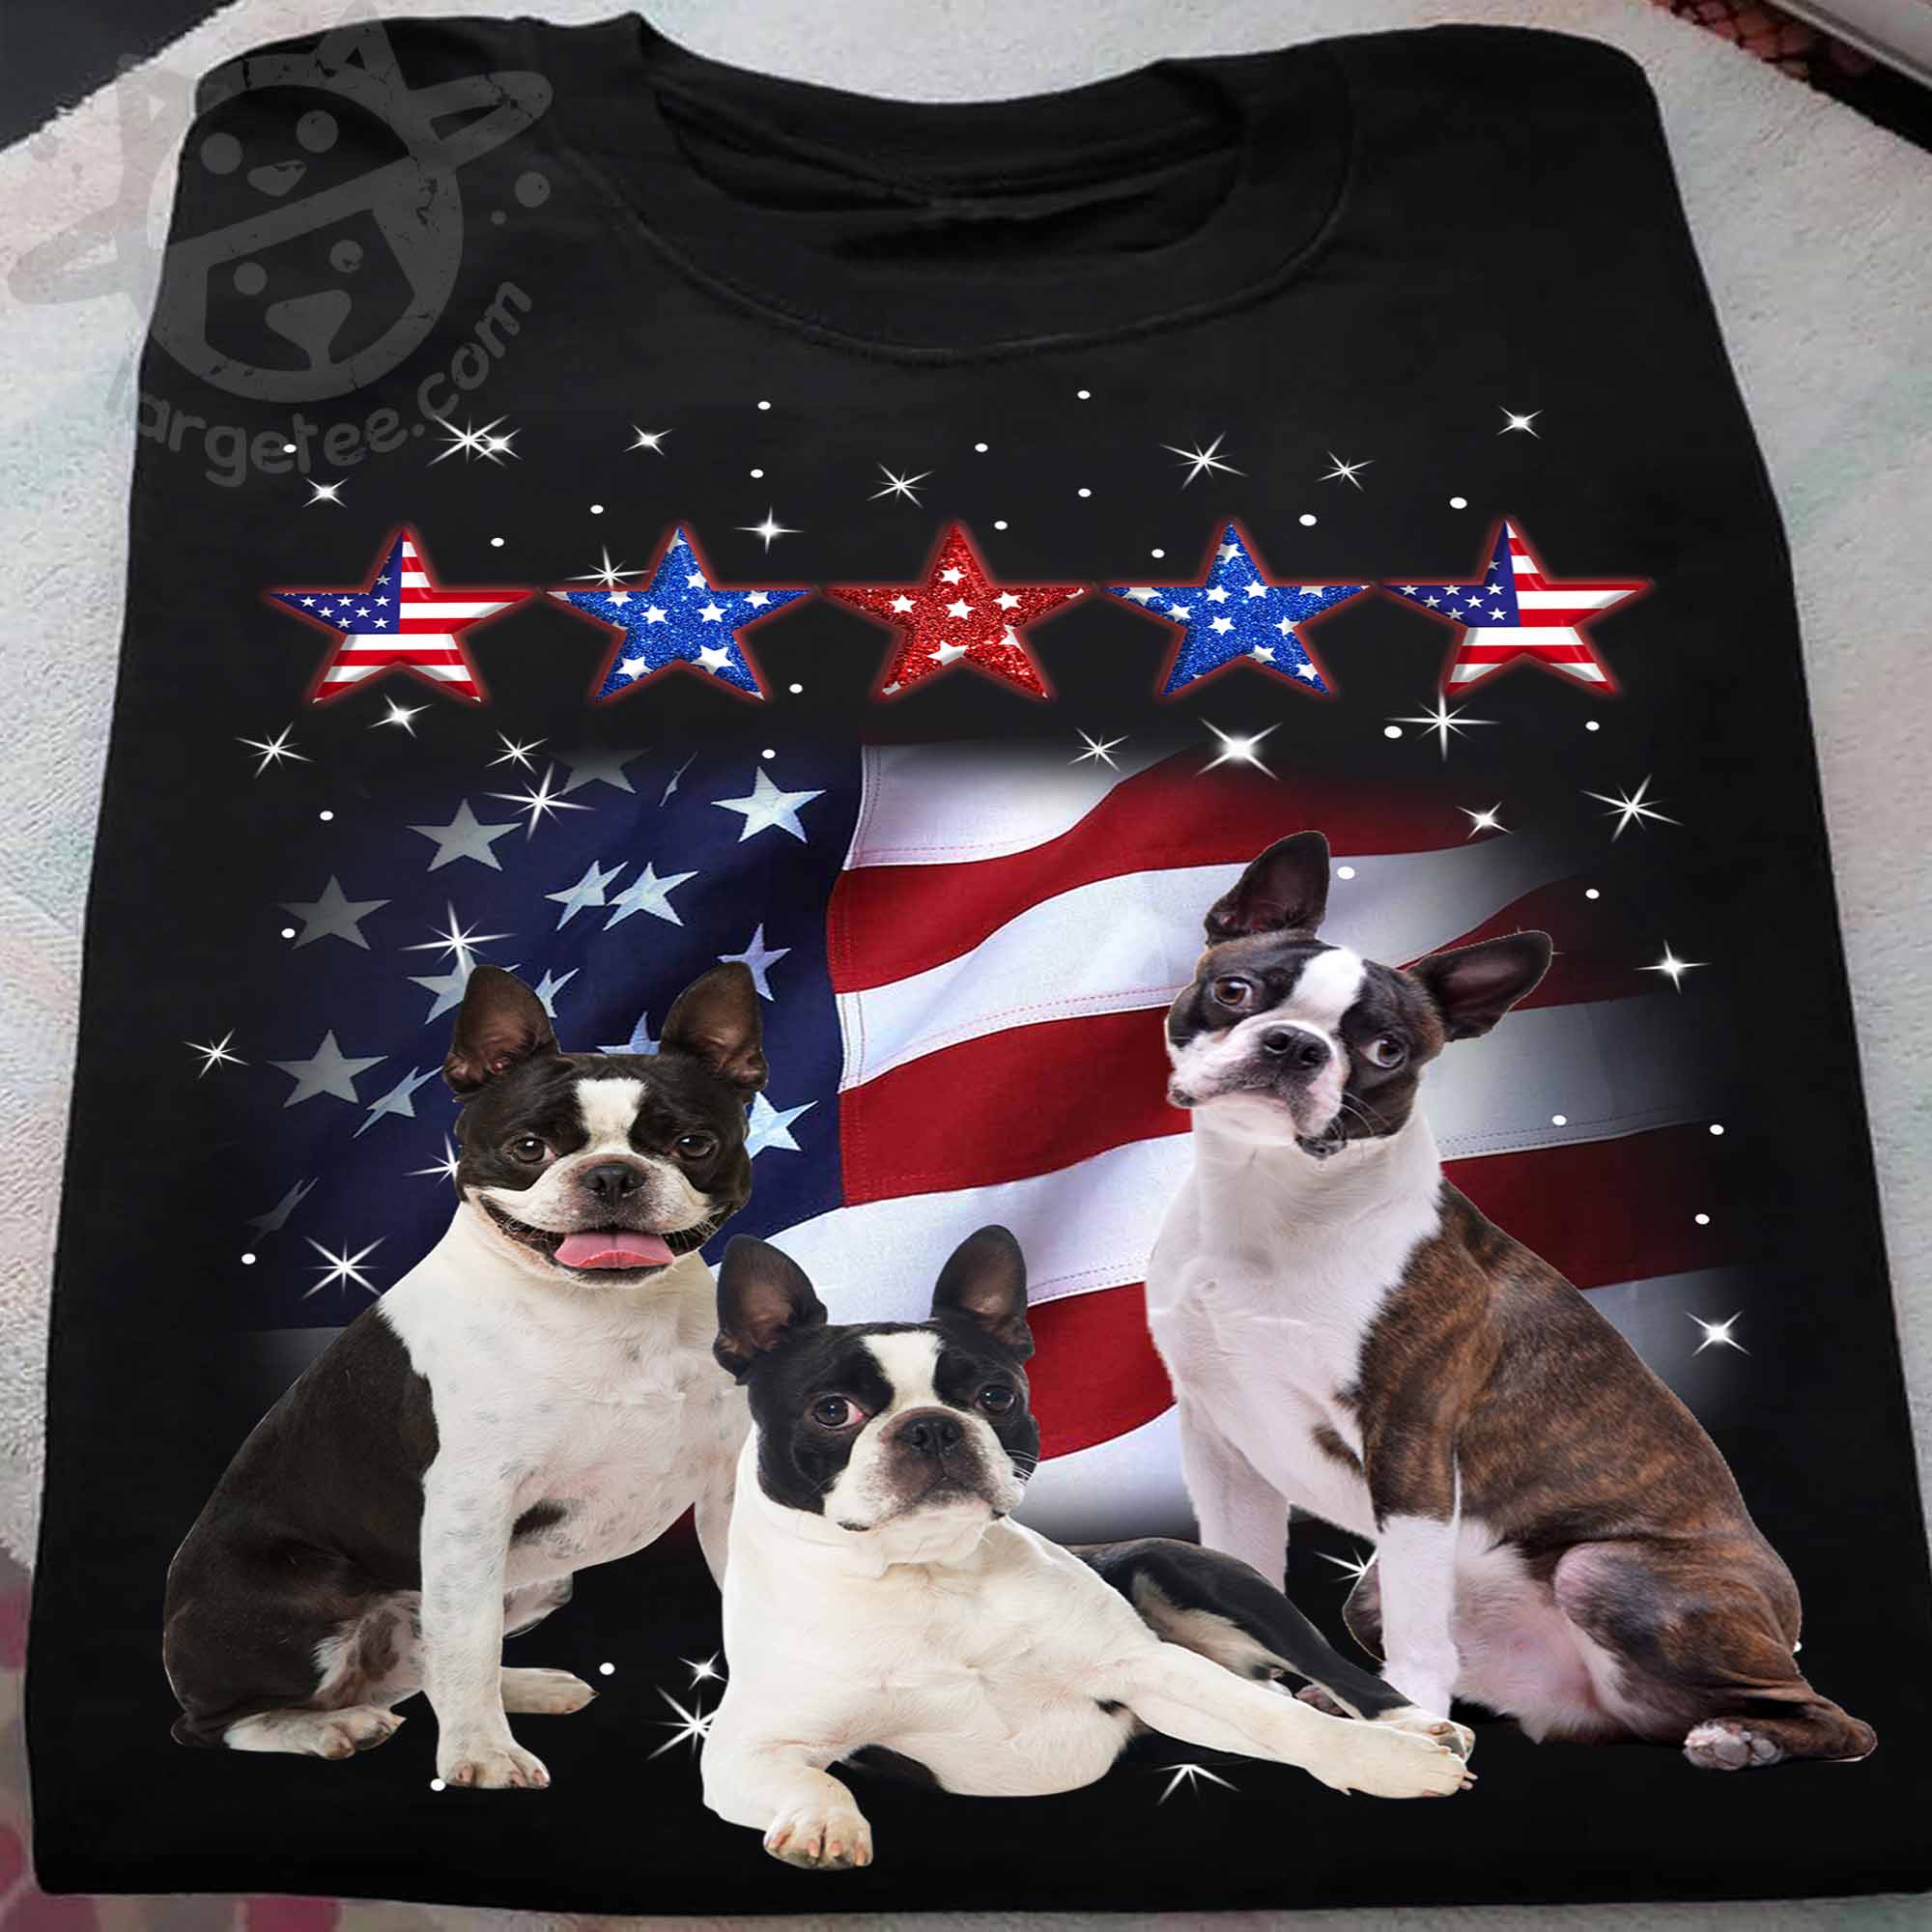 Frenchie dog and America flag - dog lover, independence day